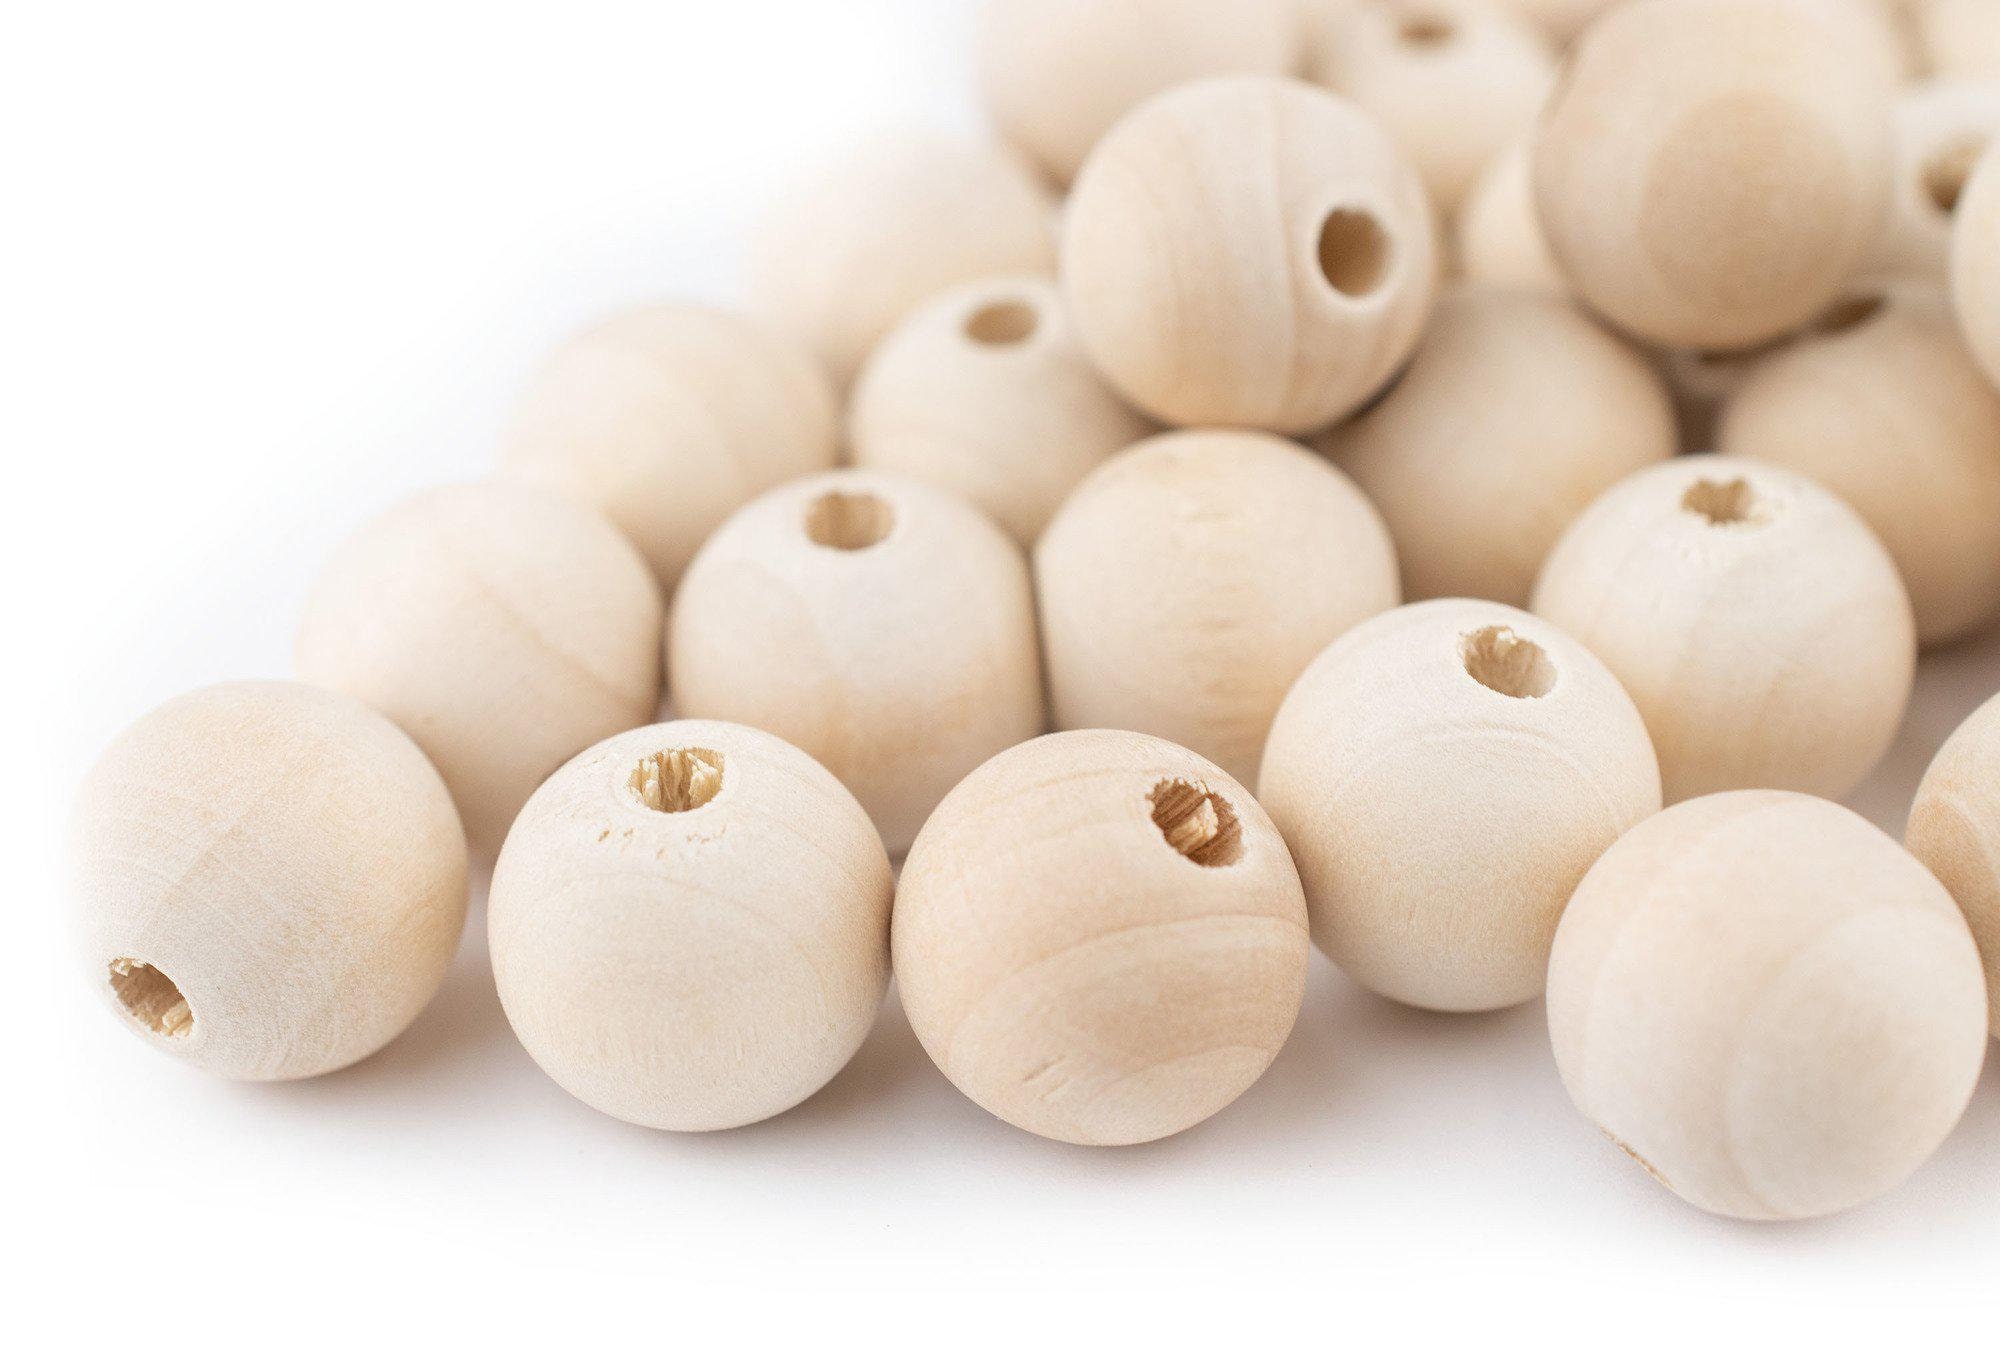 Pandahall 20mm Large Hole Natural Wooden Beads Spacer Big Round Ball  Unfinished Wood Beads for DIY Bracelet Jewelry Making Craft